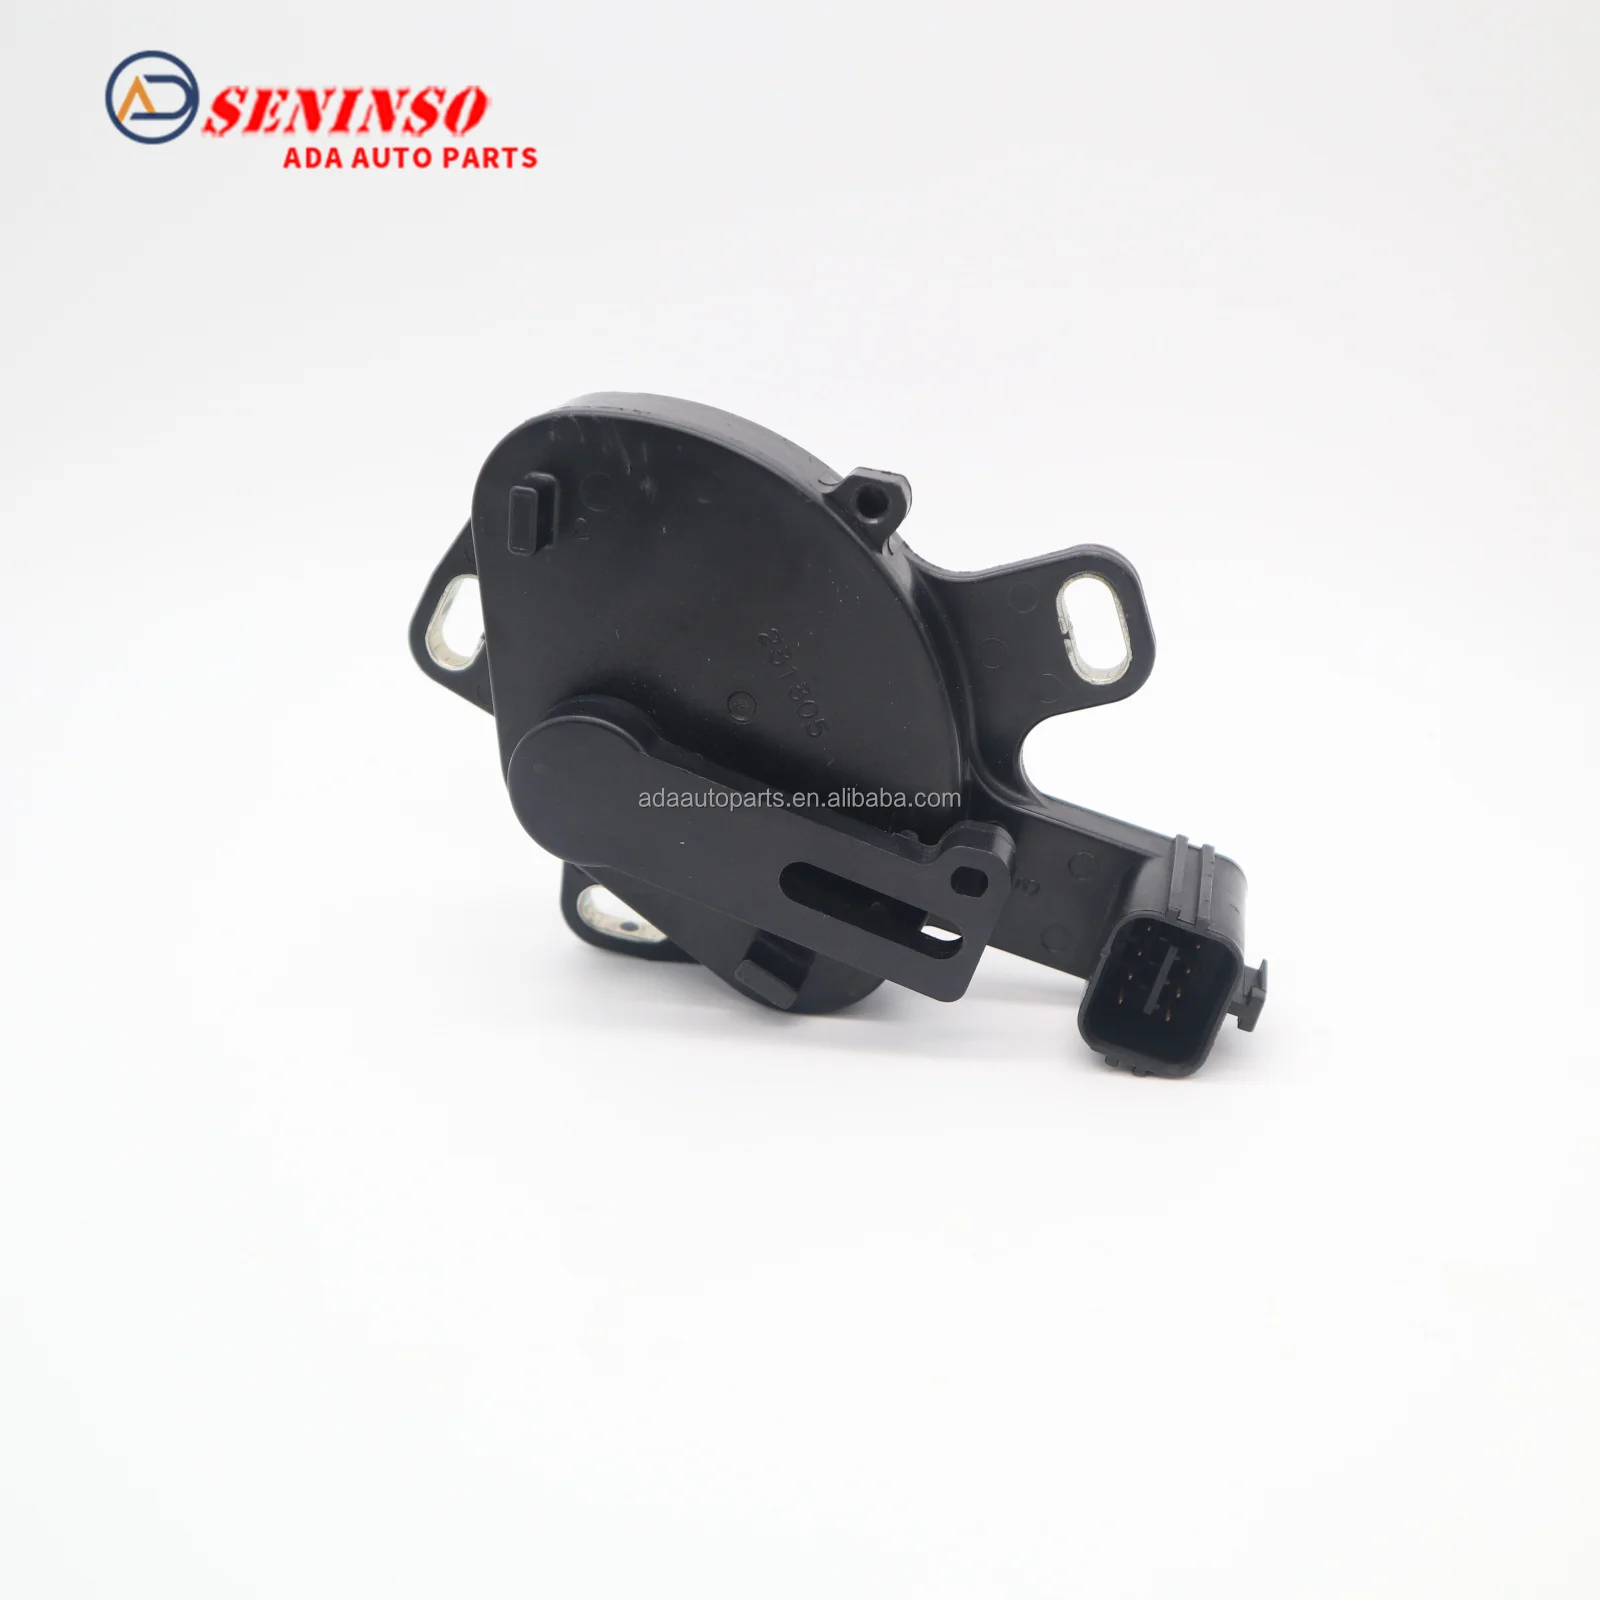 31918-1XF00 Neutral Safety Switch For Nissan Juke 1.6L Rogue Sentra 2.5L NV 2.0L 